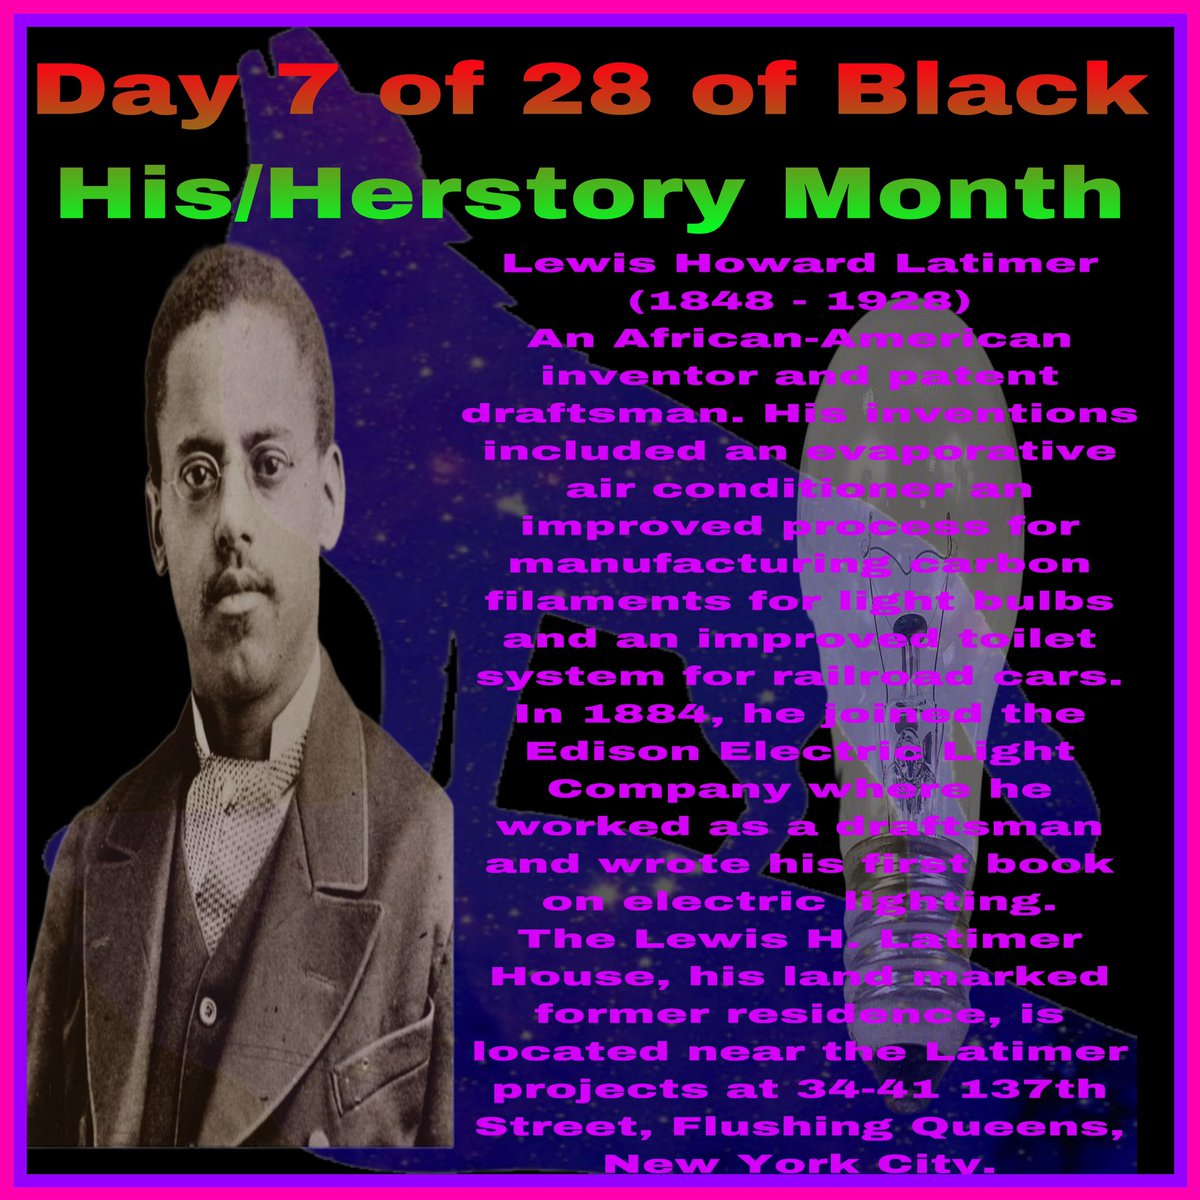 Day 7 of 28 Days of Black His/Herstory Month: Mr. Lewis Howard Latimer

#TheMoreYouKnow
 #BLM 
#BlackHistoryMonth  
#BlackHerstoryMonth 
#28DaysofBlackHistory
#xSilverrWolf
#STG
#BunniiGang
#KDT